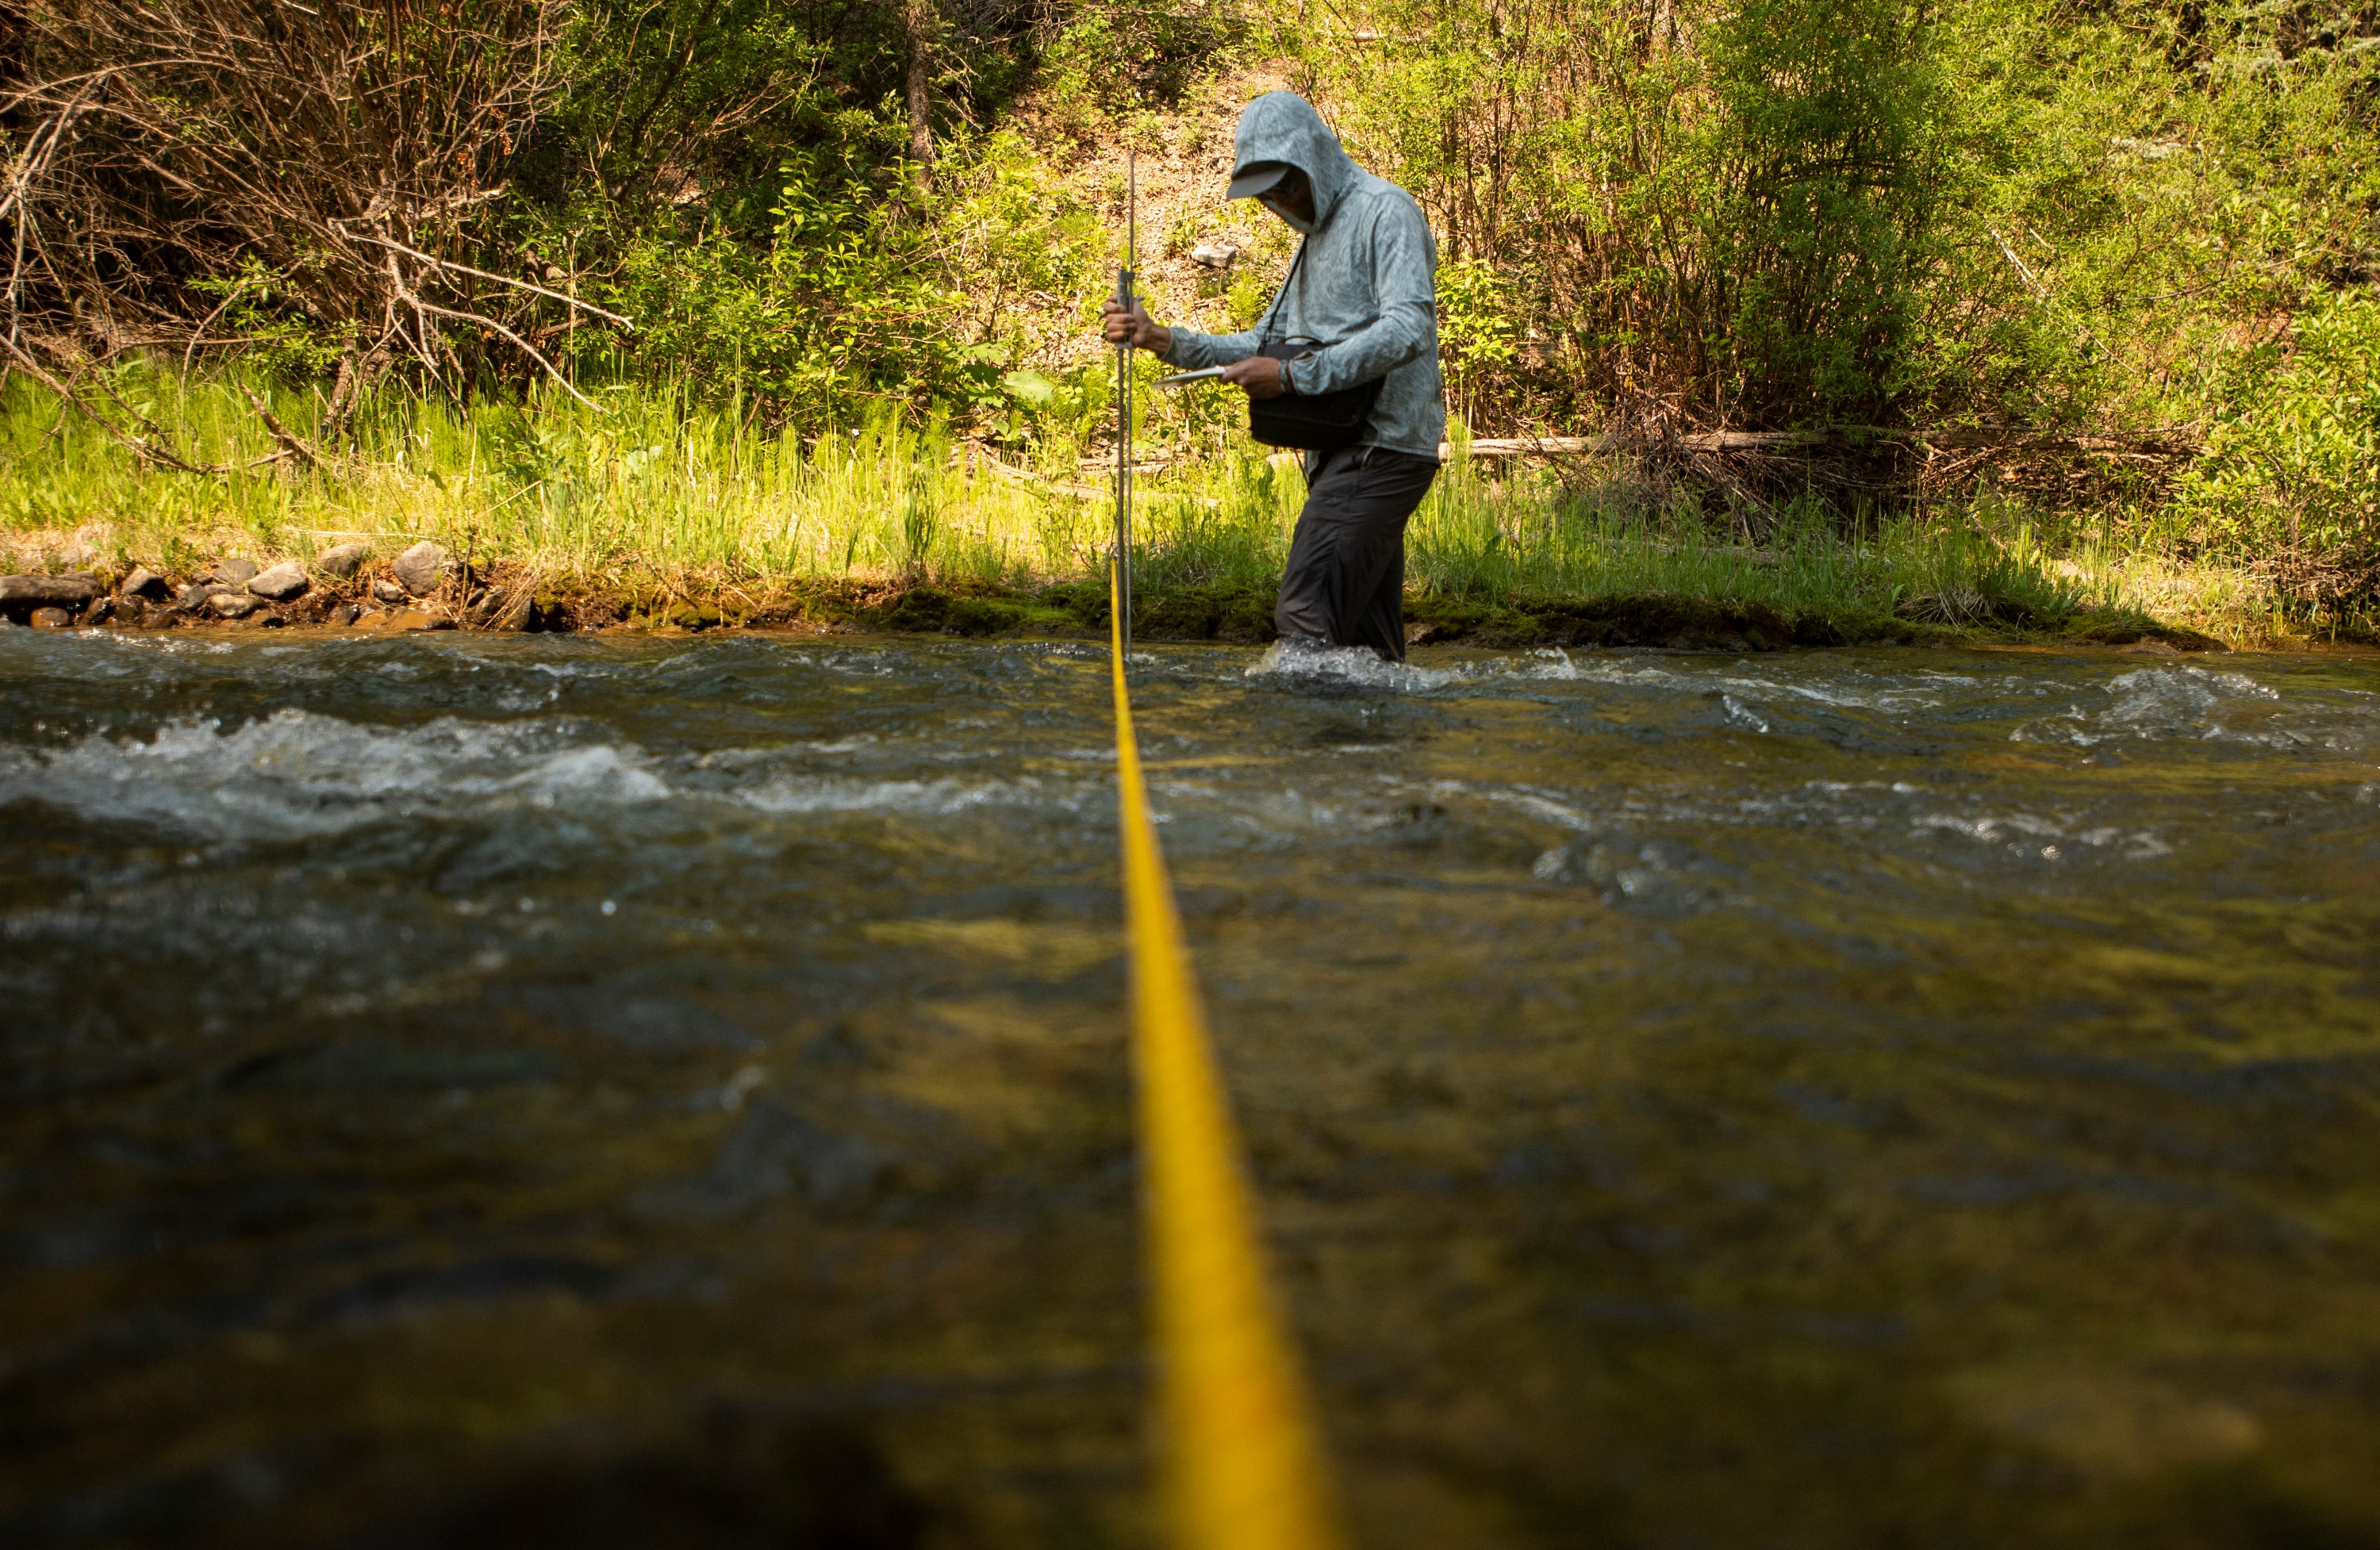 Adrian Bergere, interim program coordinator for the San Miguel Watershed Coalition, collects stream gauging data along the South Fork San Miguel River near Telluride, Colorado, on June 22, 2021.